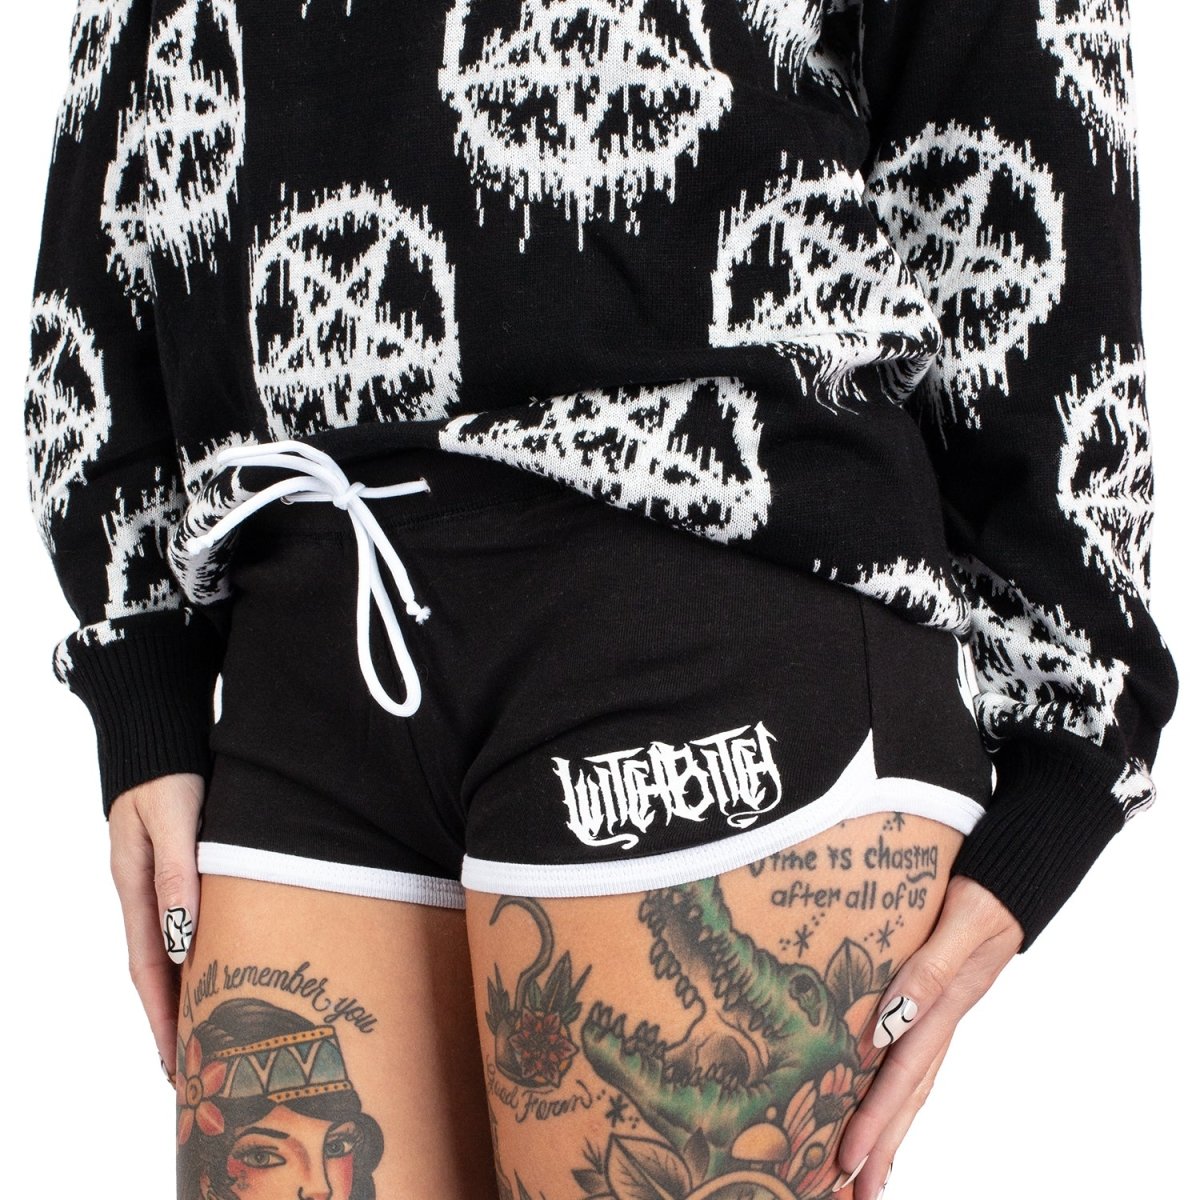 Too Fast | Witch Bitch White Trim Black Dolphin Shorts